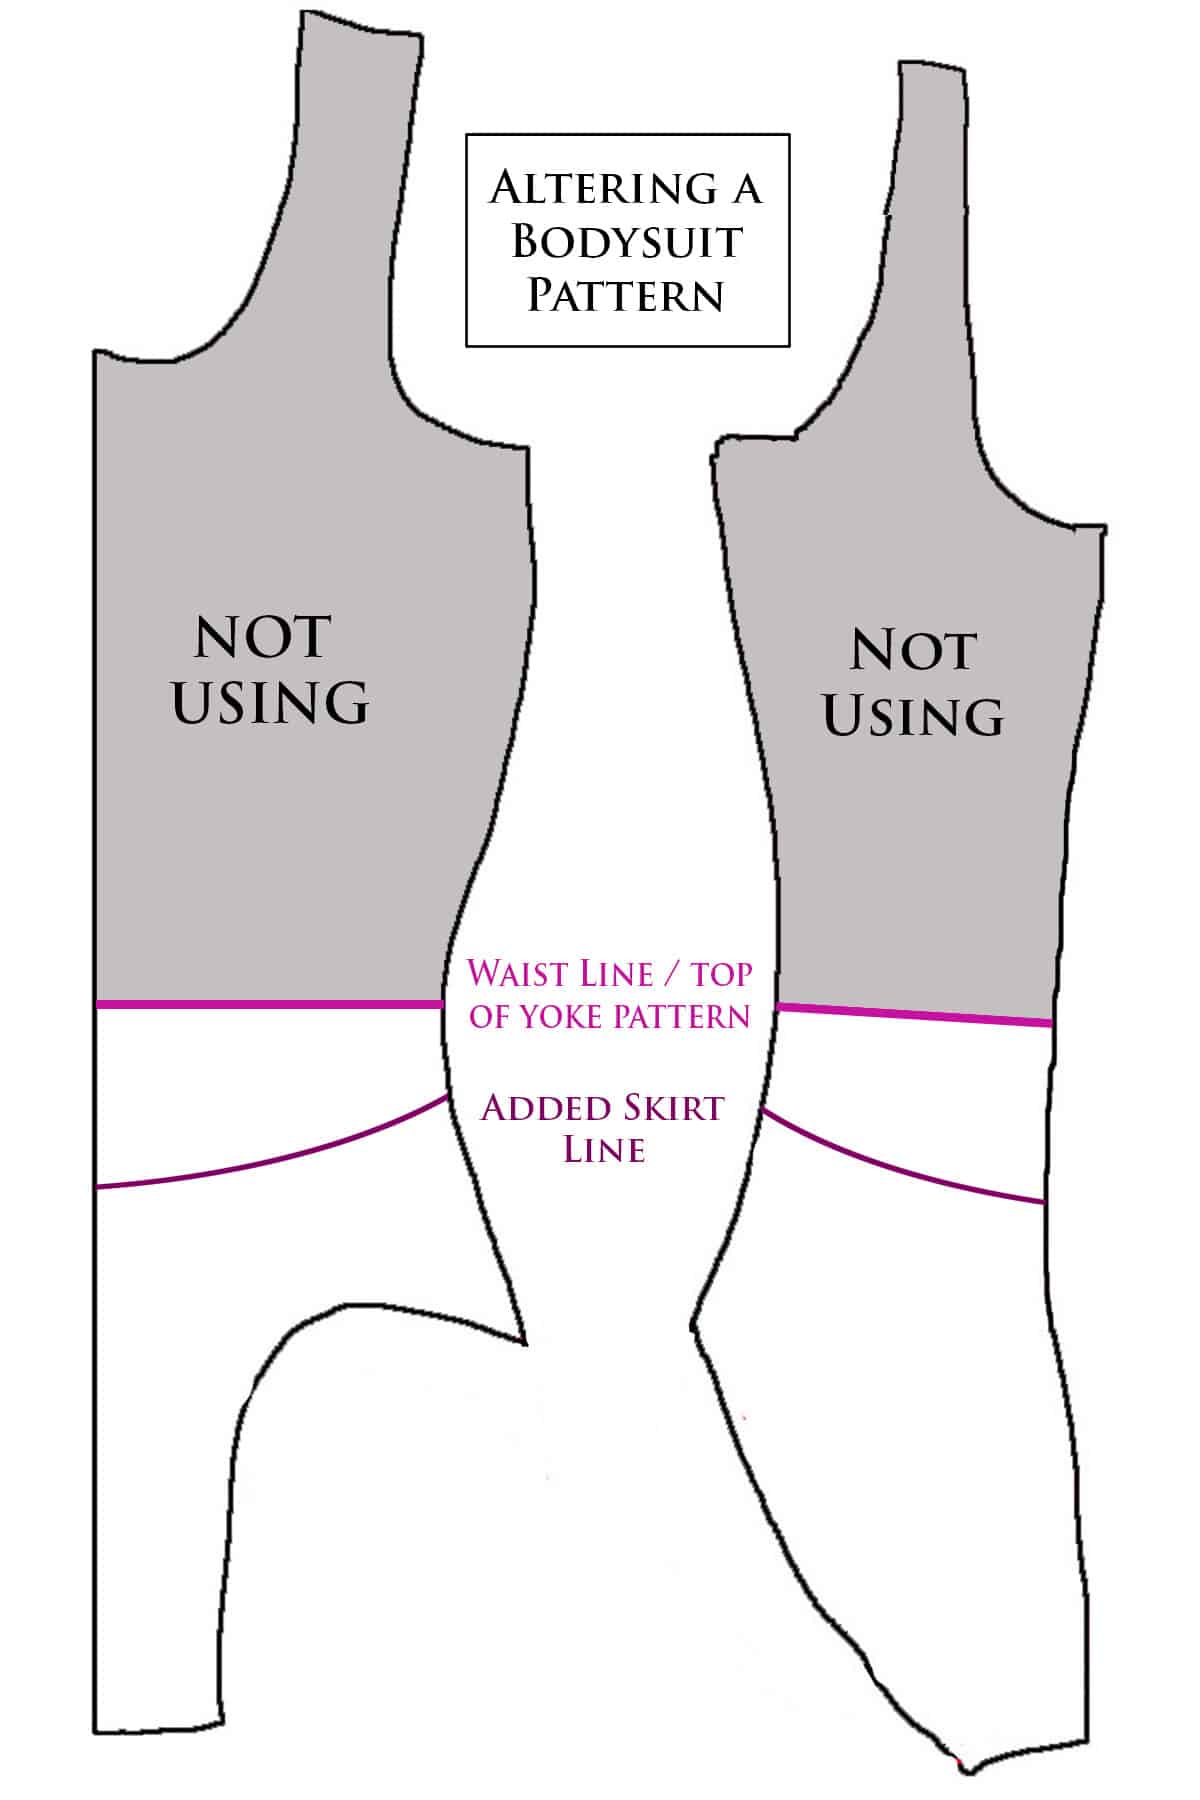 A diagram showing the waist line and skirt lines drawn on a bodysuit pattern.